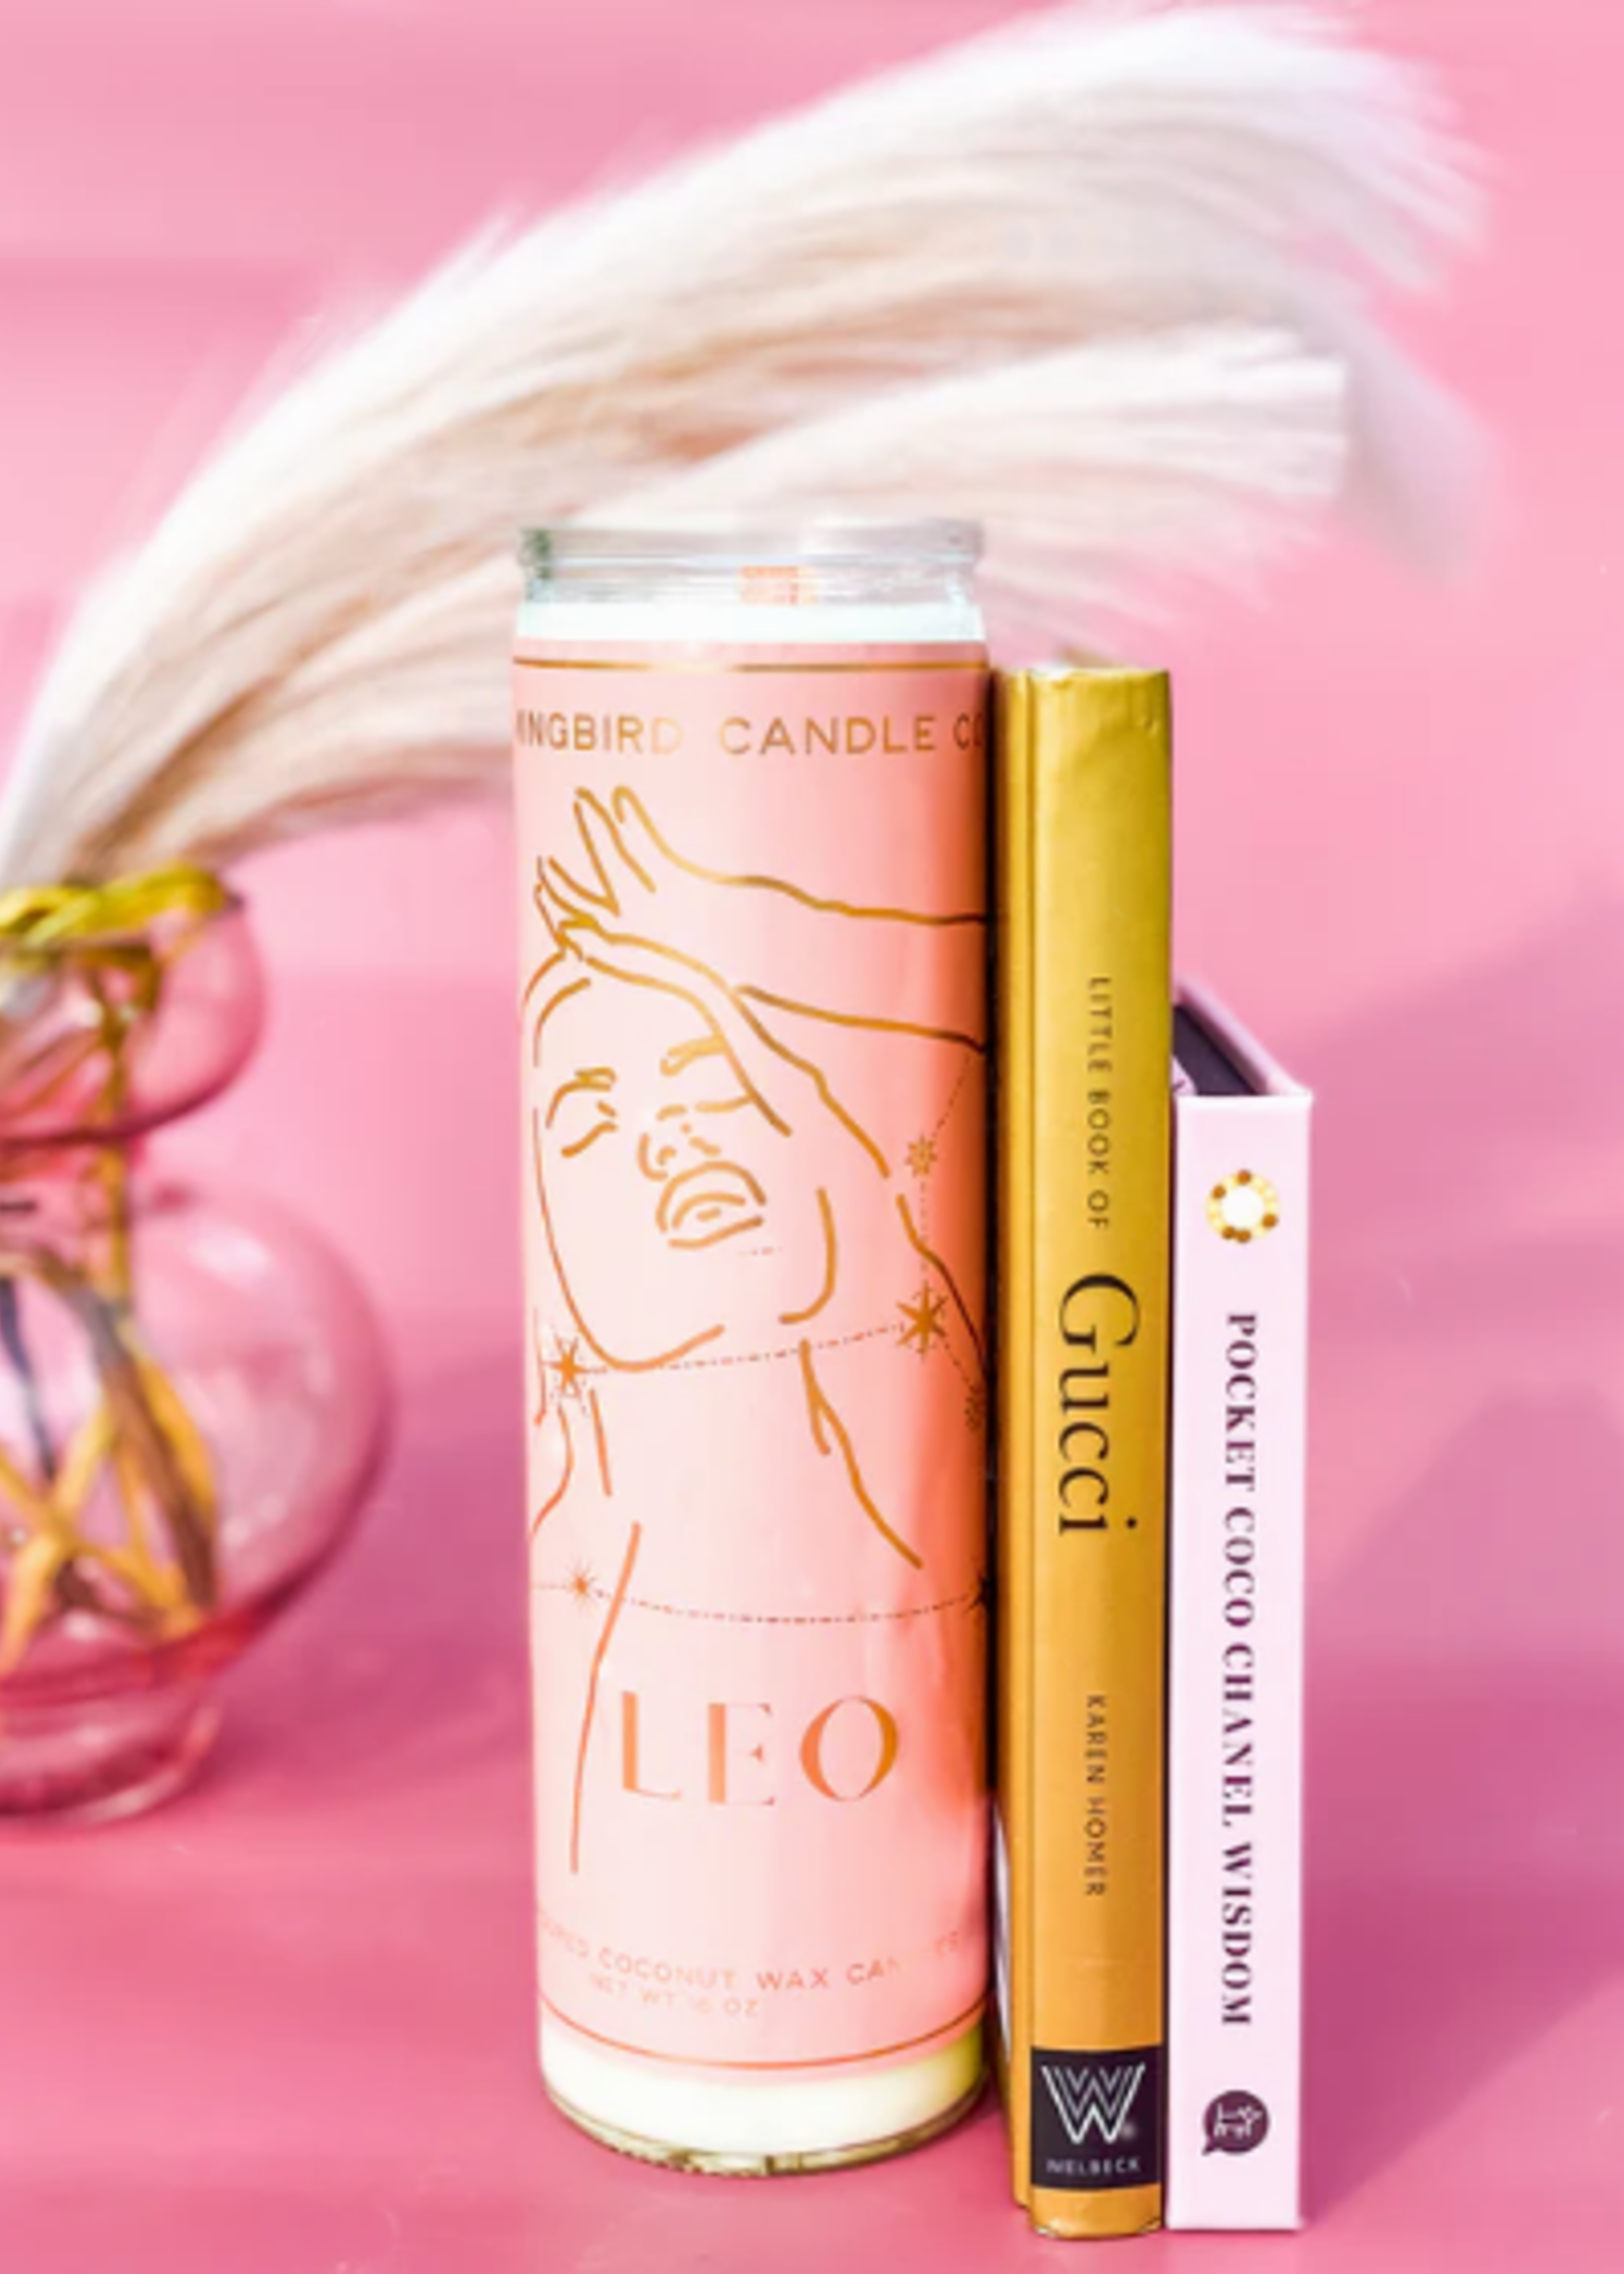 Madeline Russo Zodiac Line Candles